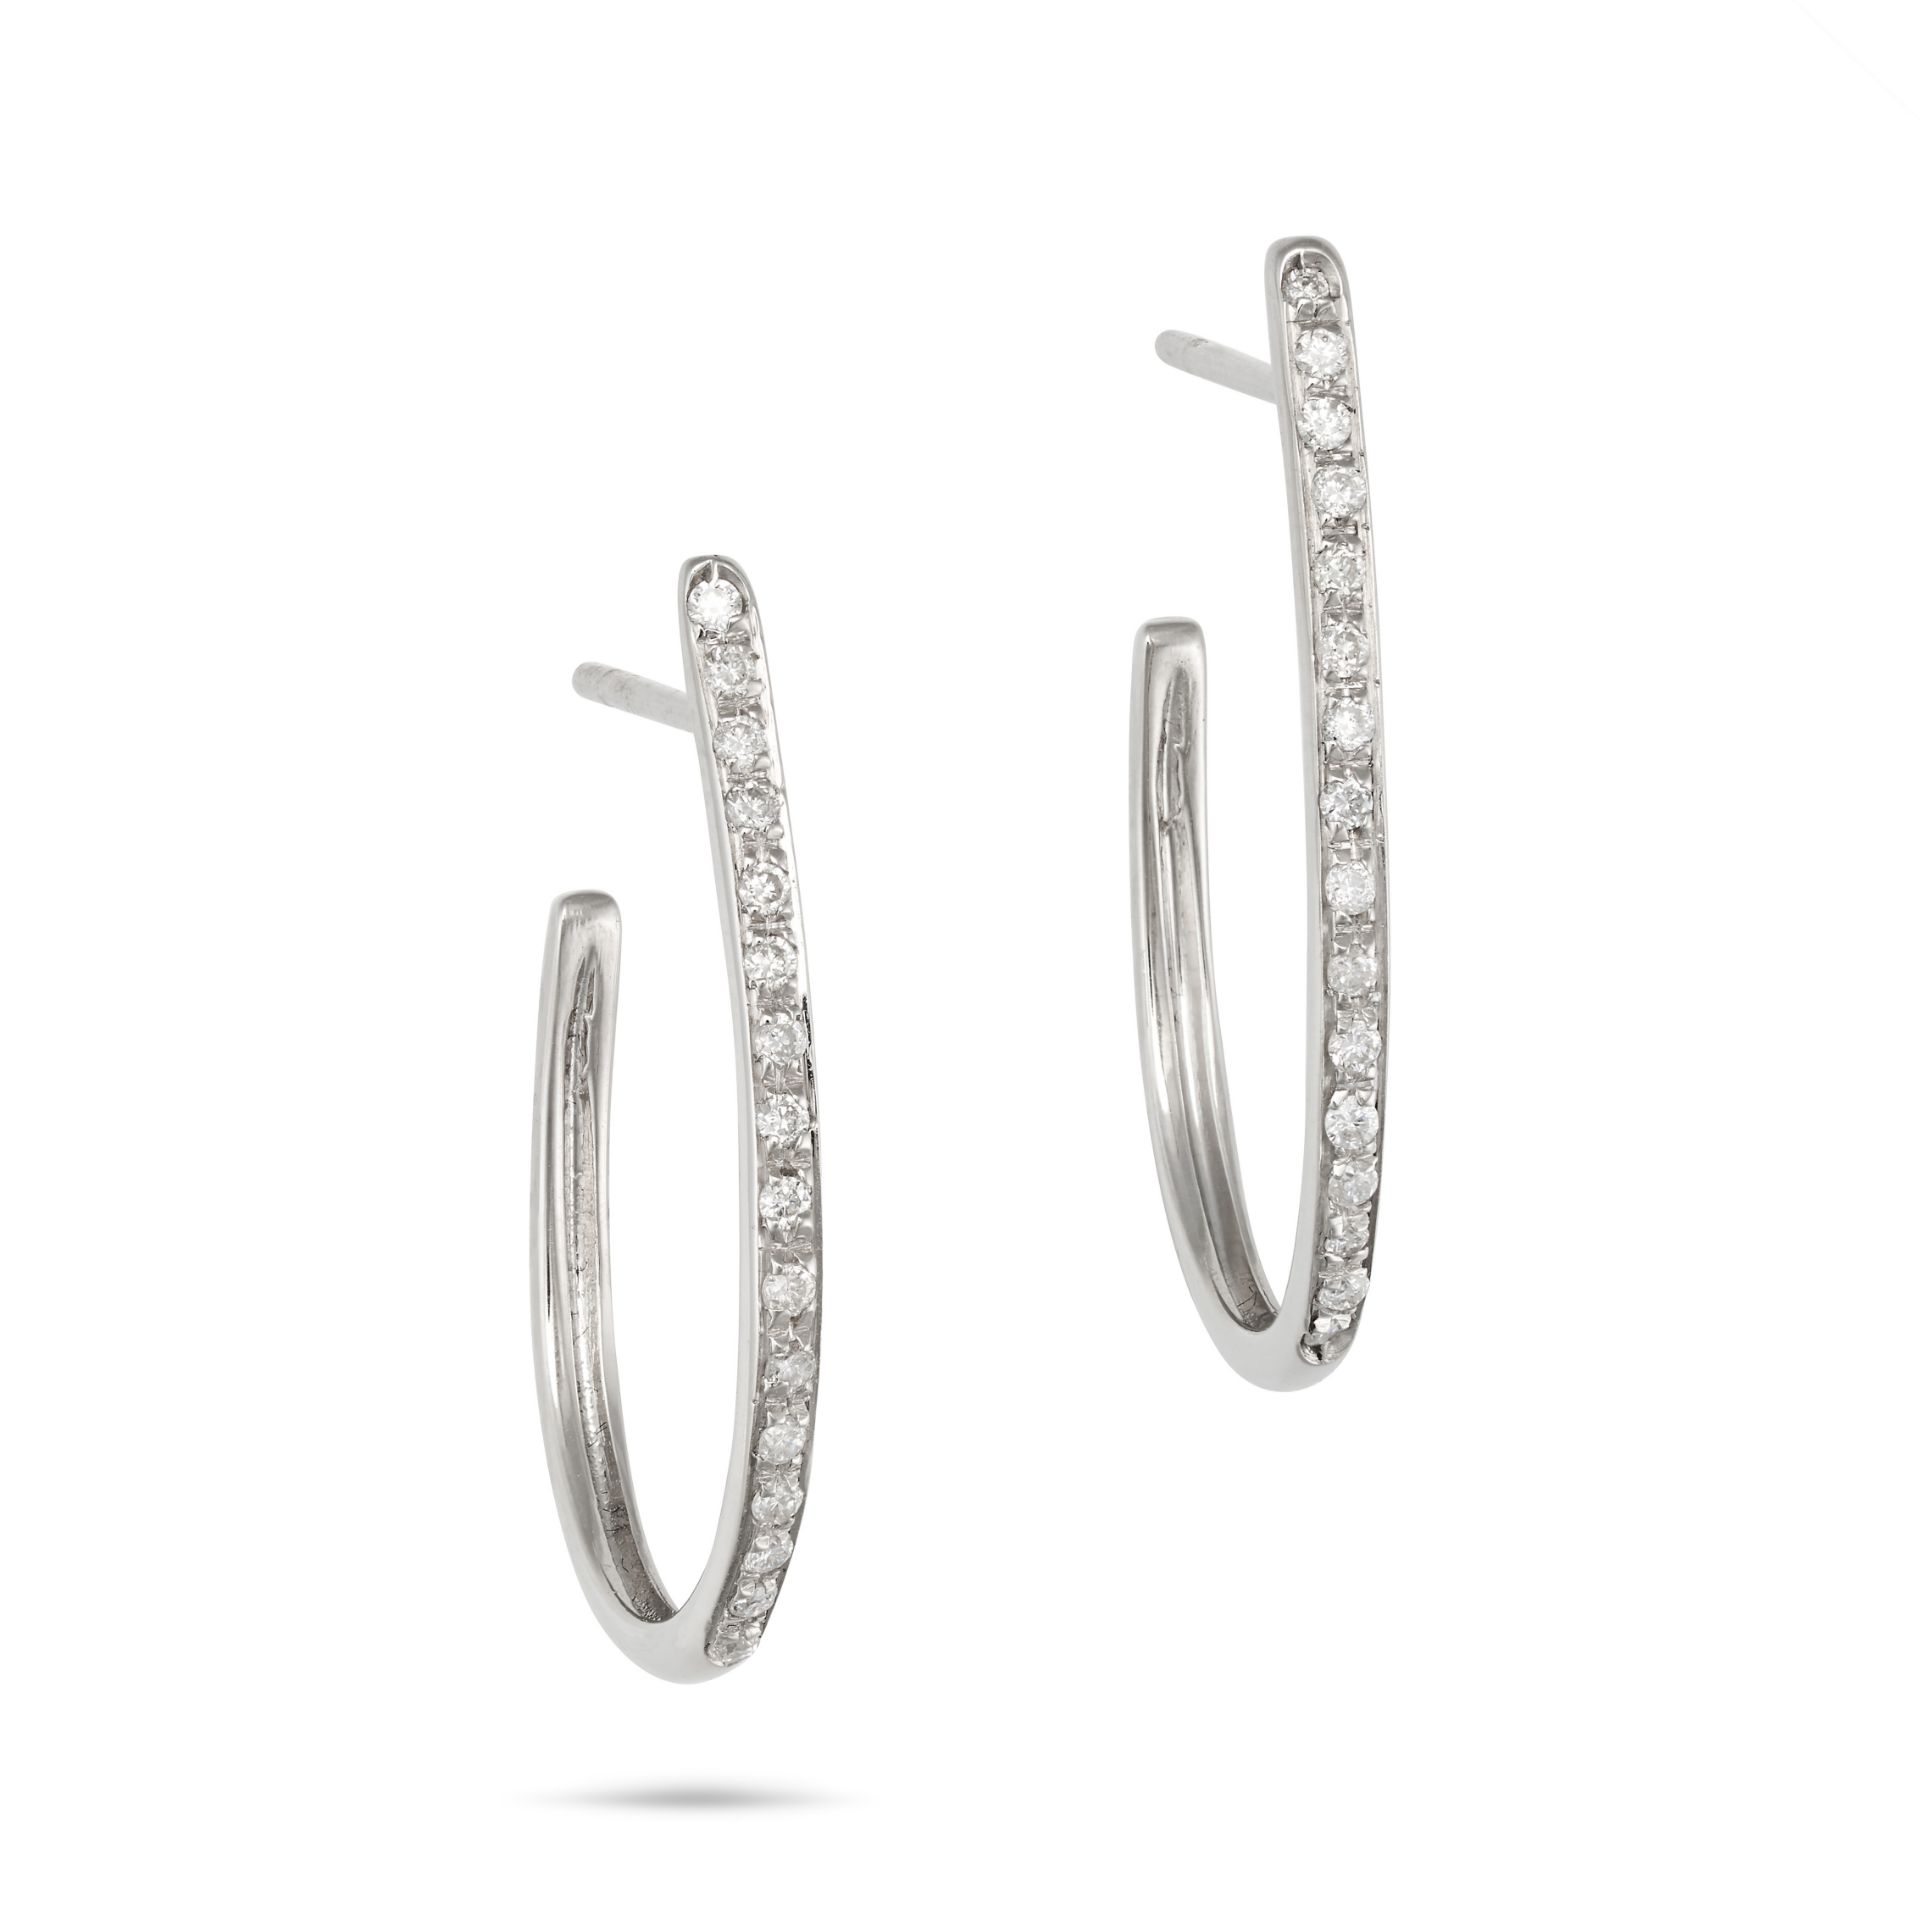 A PAIR OF DIAMOND HOOP EARRINGS each set with a row of round brilliant cut diamonds, stamped 750,...